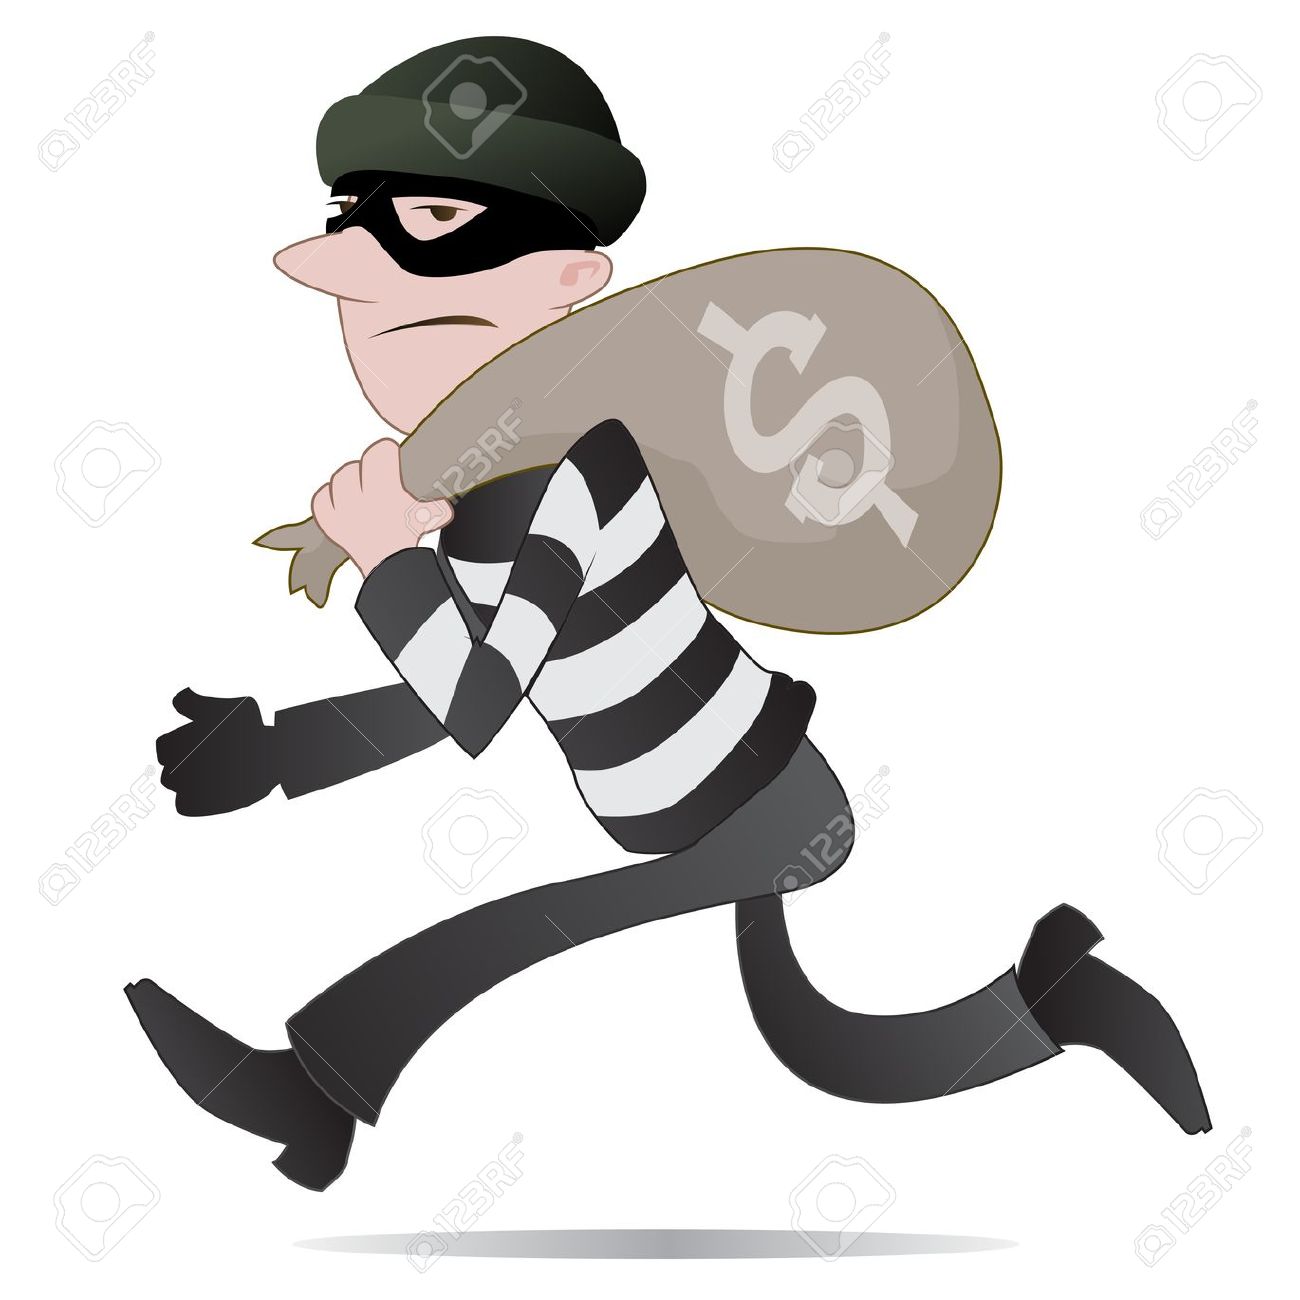 free clipart bank robbery - photo #36